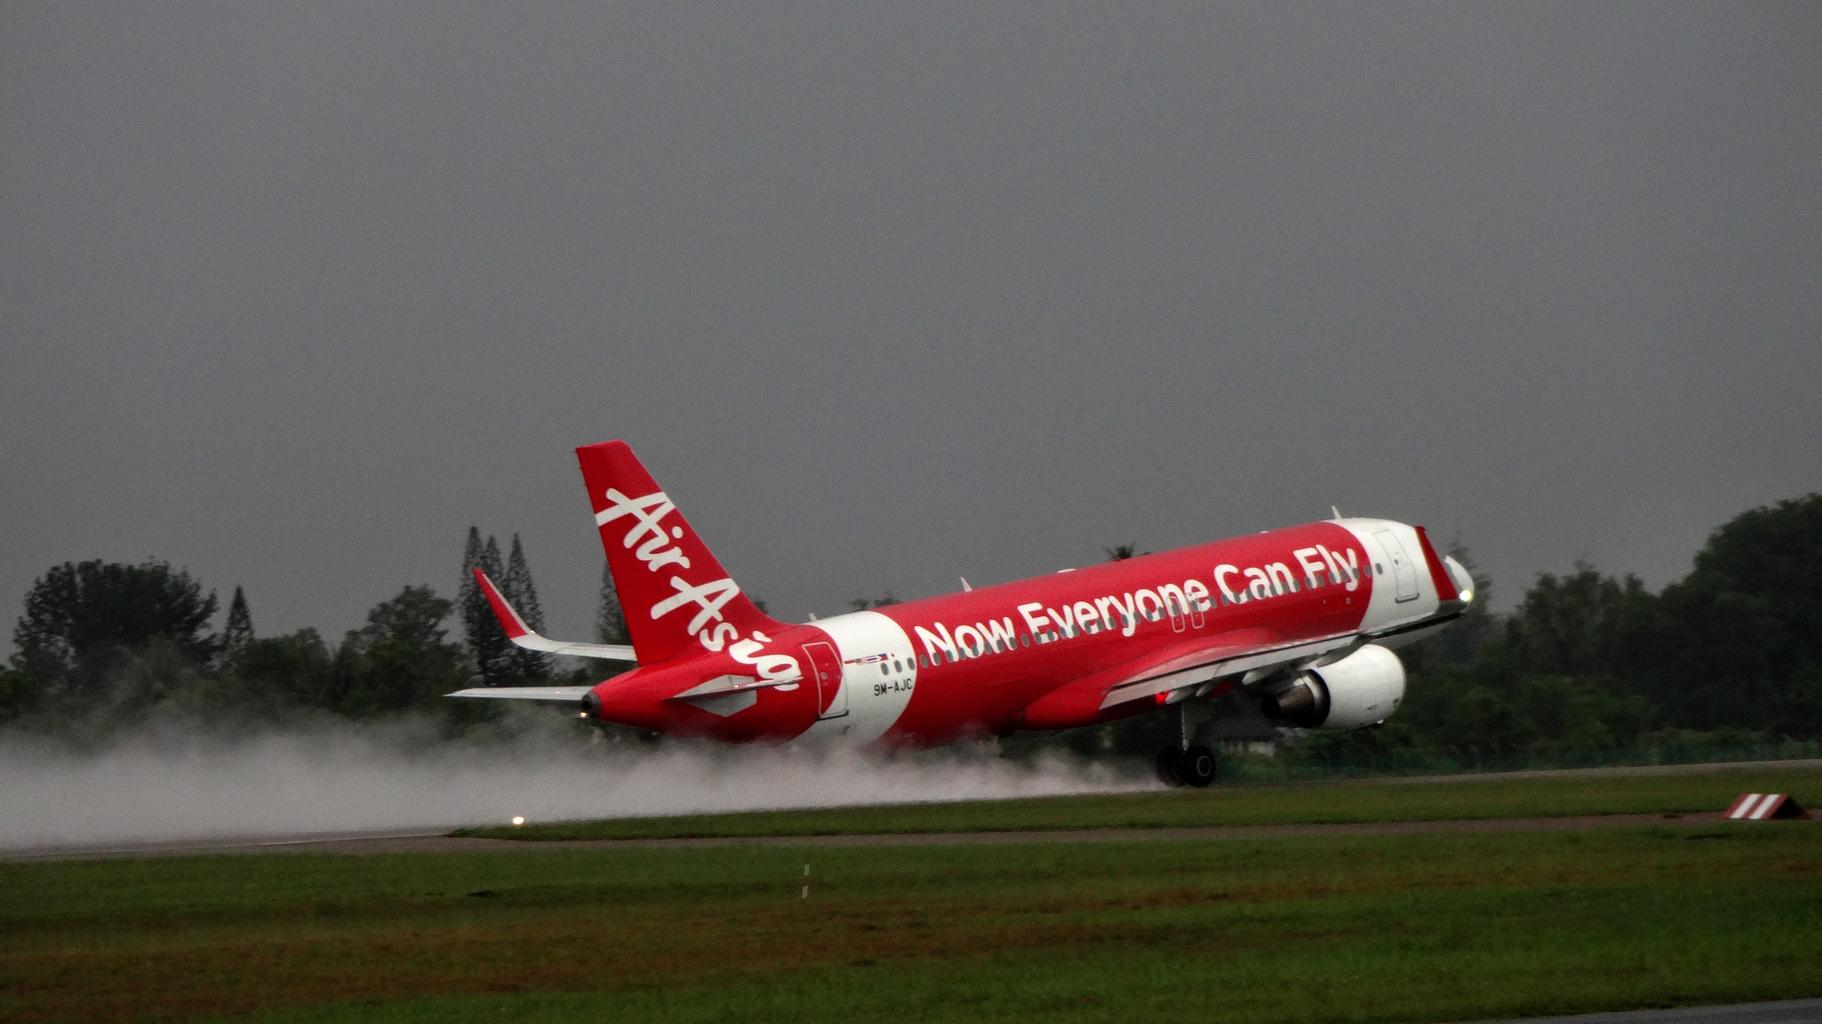 AirAsia to Fly from KK to Bangkok from Aug 16 – The Ninth Airline Route that will Connect Malasia and Thailand!